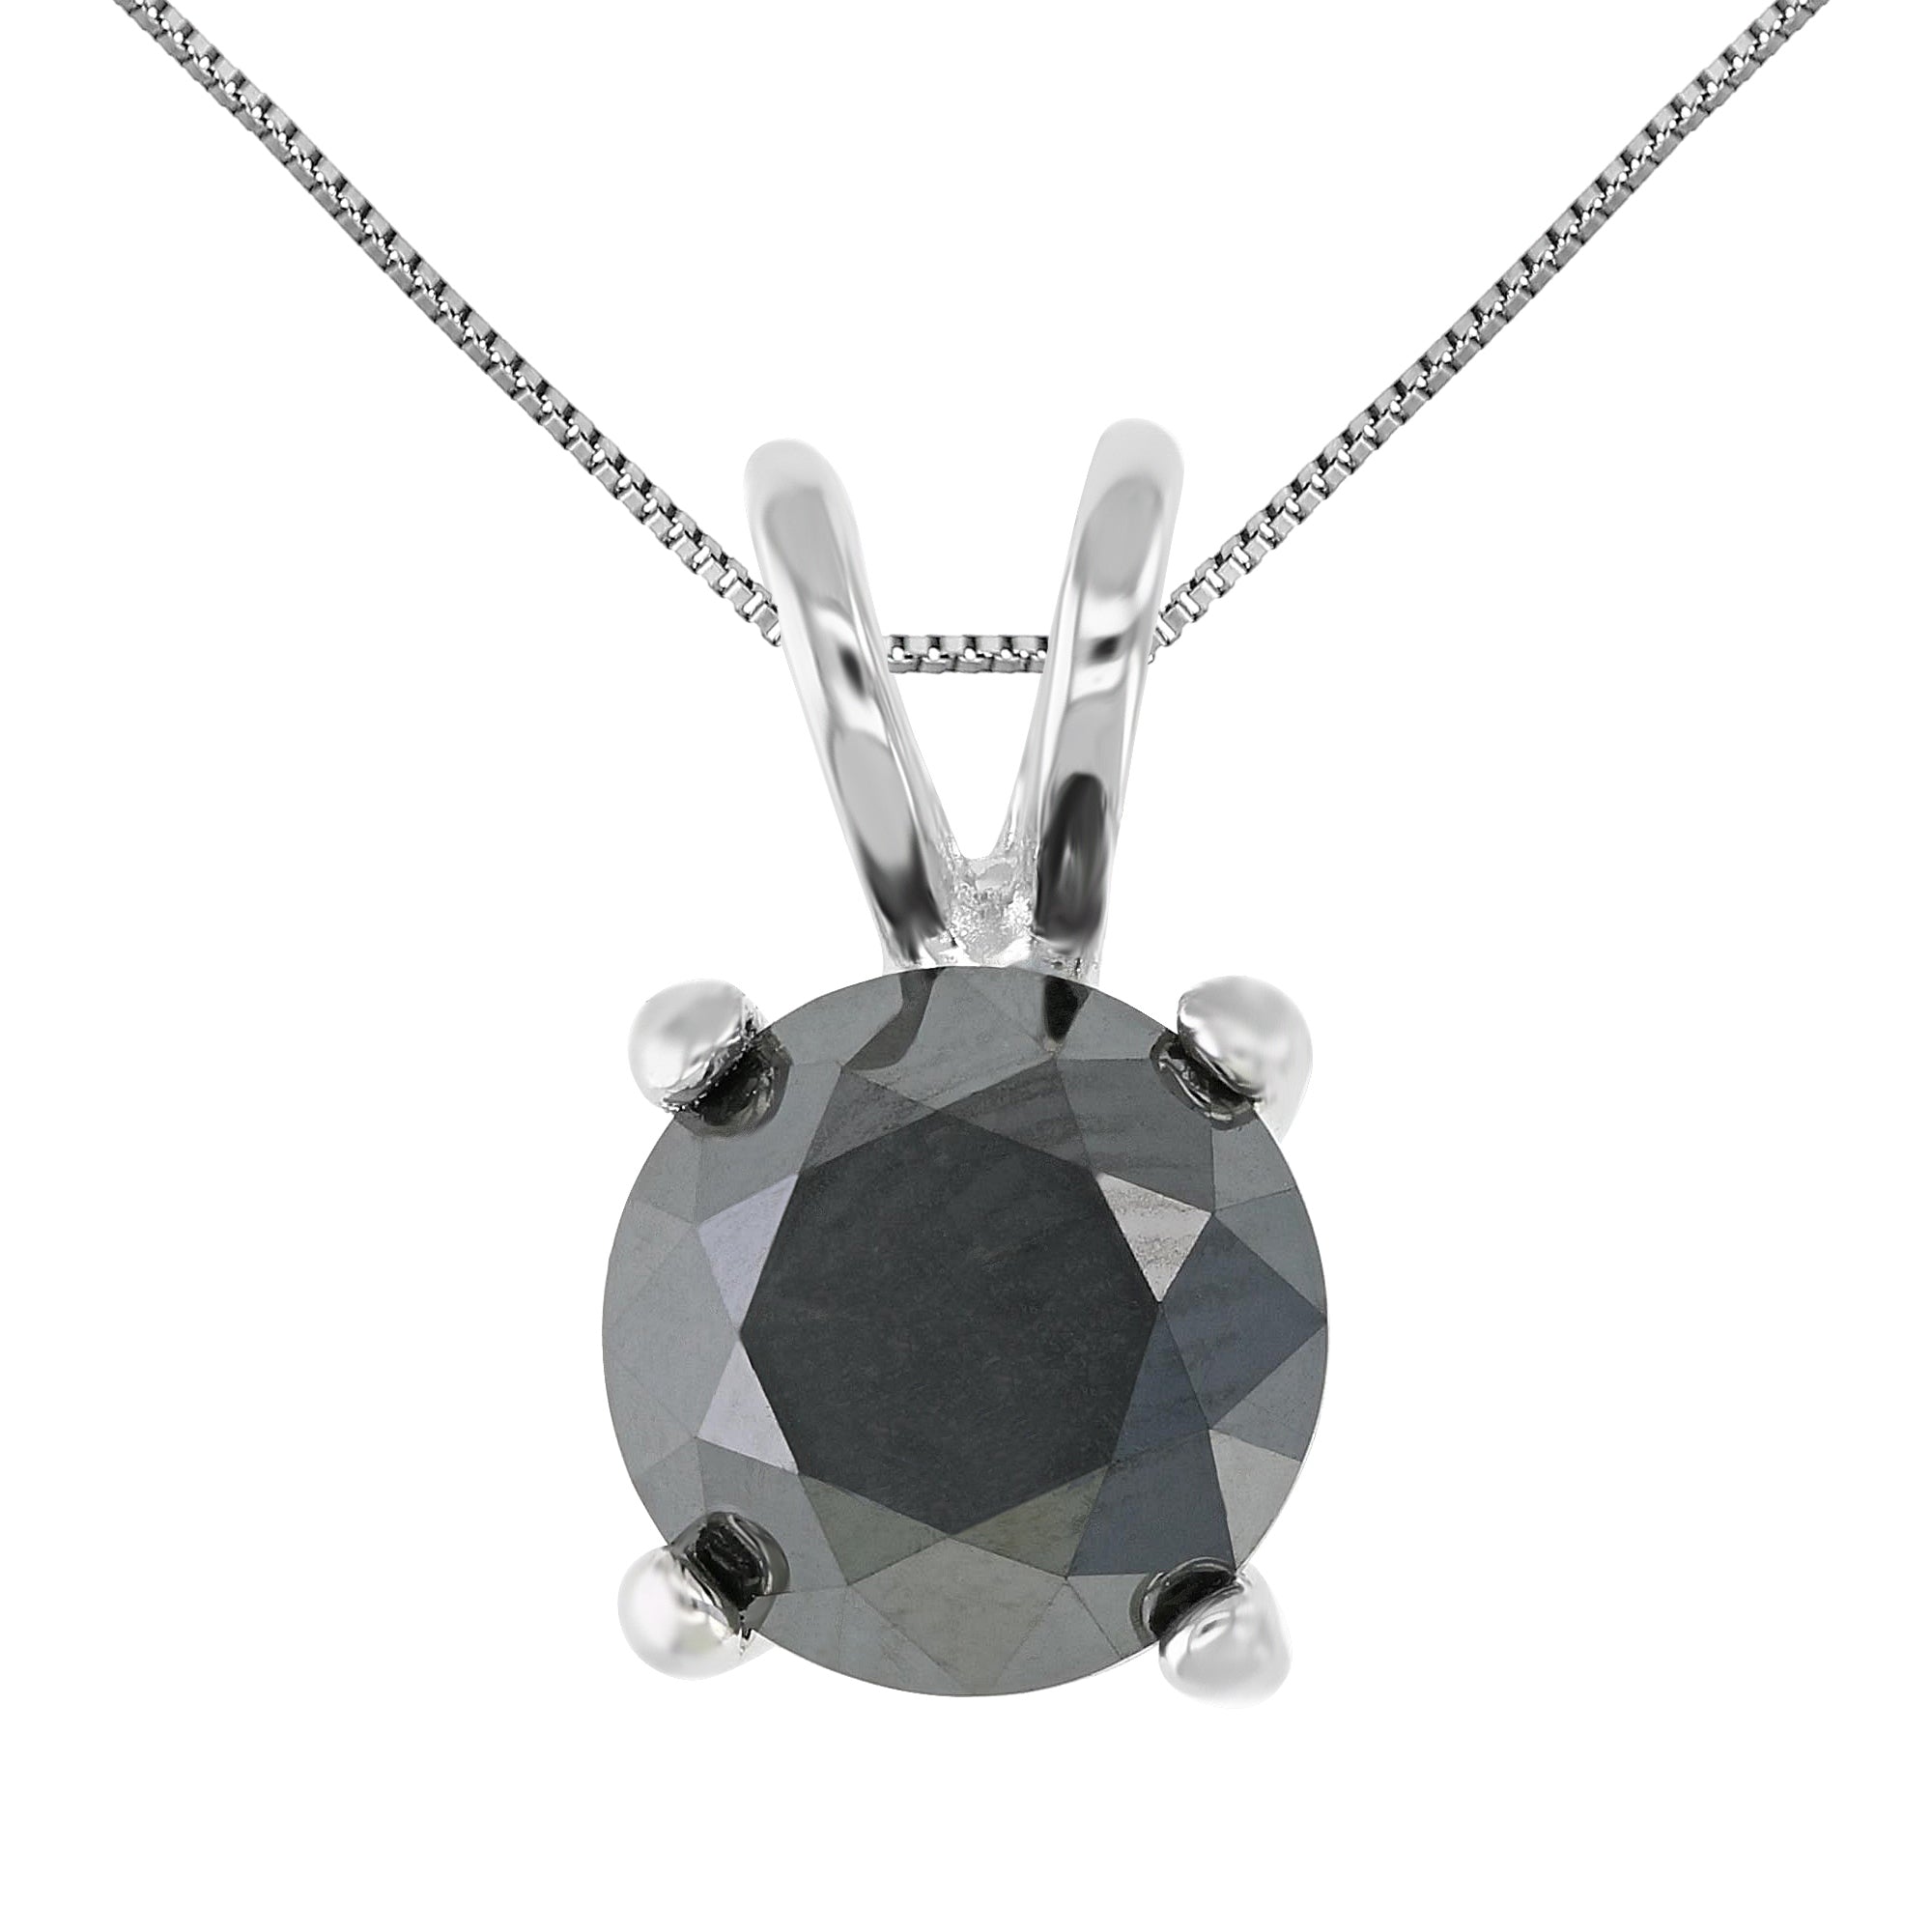 1.50 cttw Diamond Pendant, Black Diamond Solitaire Pendant Necklace for Women in .925 Sterling Silver with Rhodium, 18 Inch Chain, Prong Setting